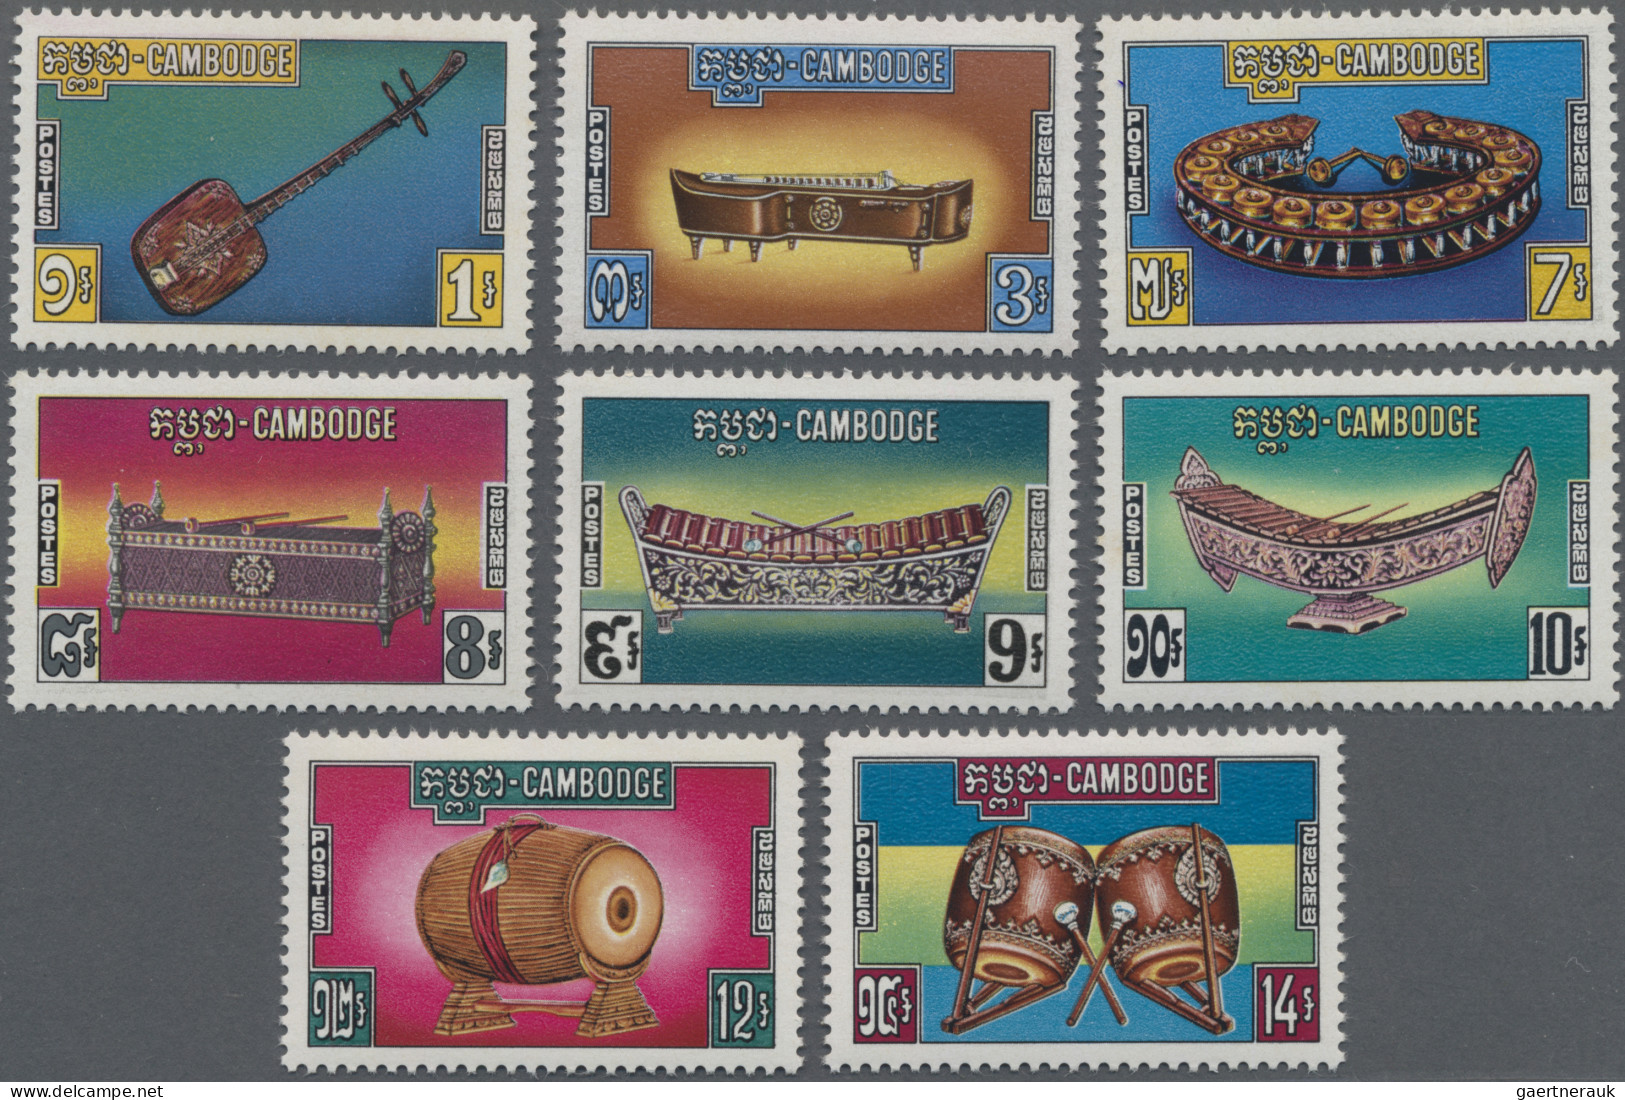 Cambodia: 1975 'Musical Instruments': Unissued Set Of 8 WITHOUT OVERPRINT, Mint - Cambodia